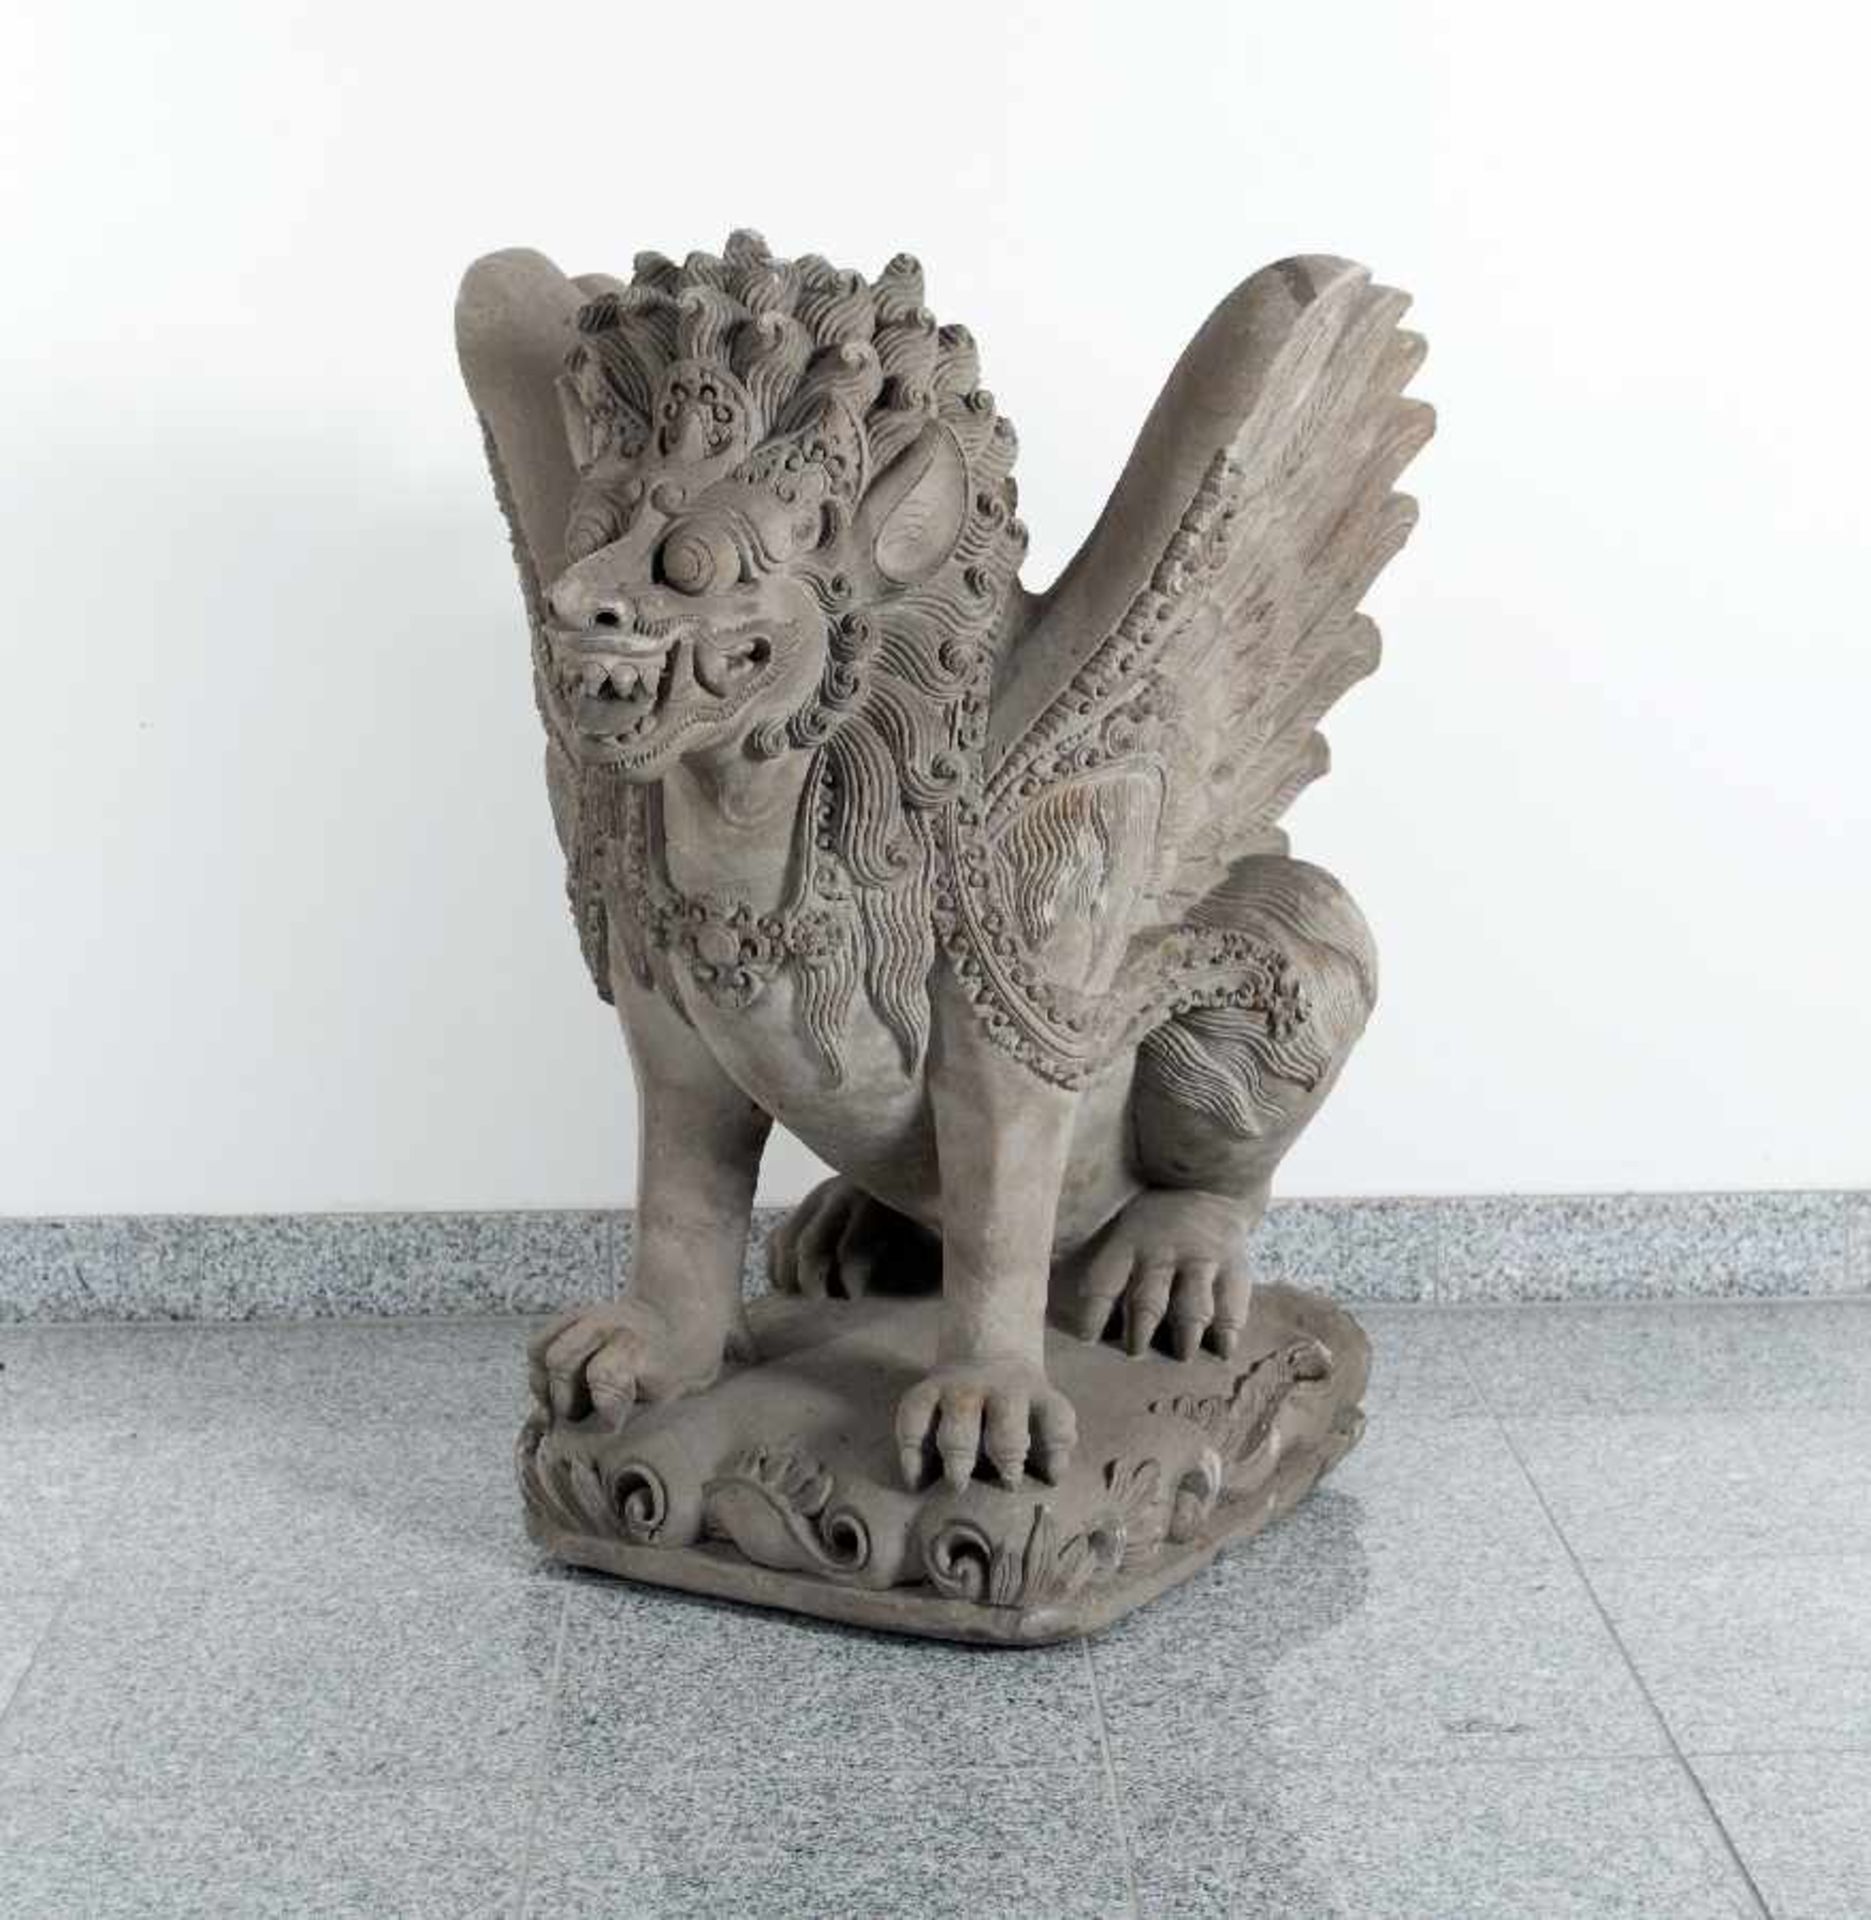 Bali / IndonesiaSinga (Winged Lion)Cast stone, finished by hand; H 82 cm, W 60 cm, D 76 cm;